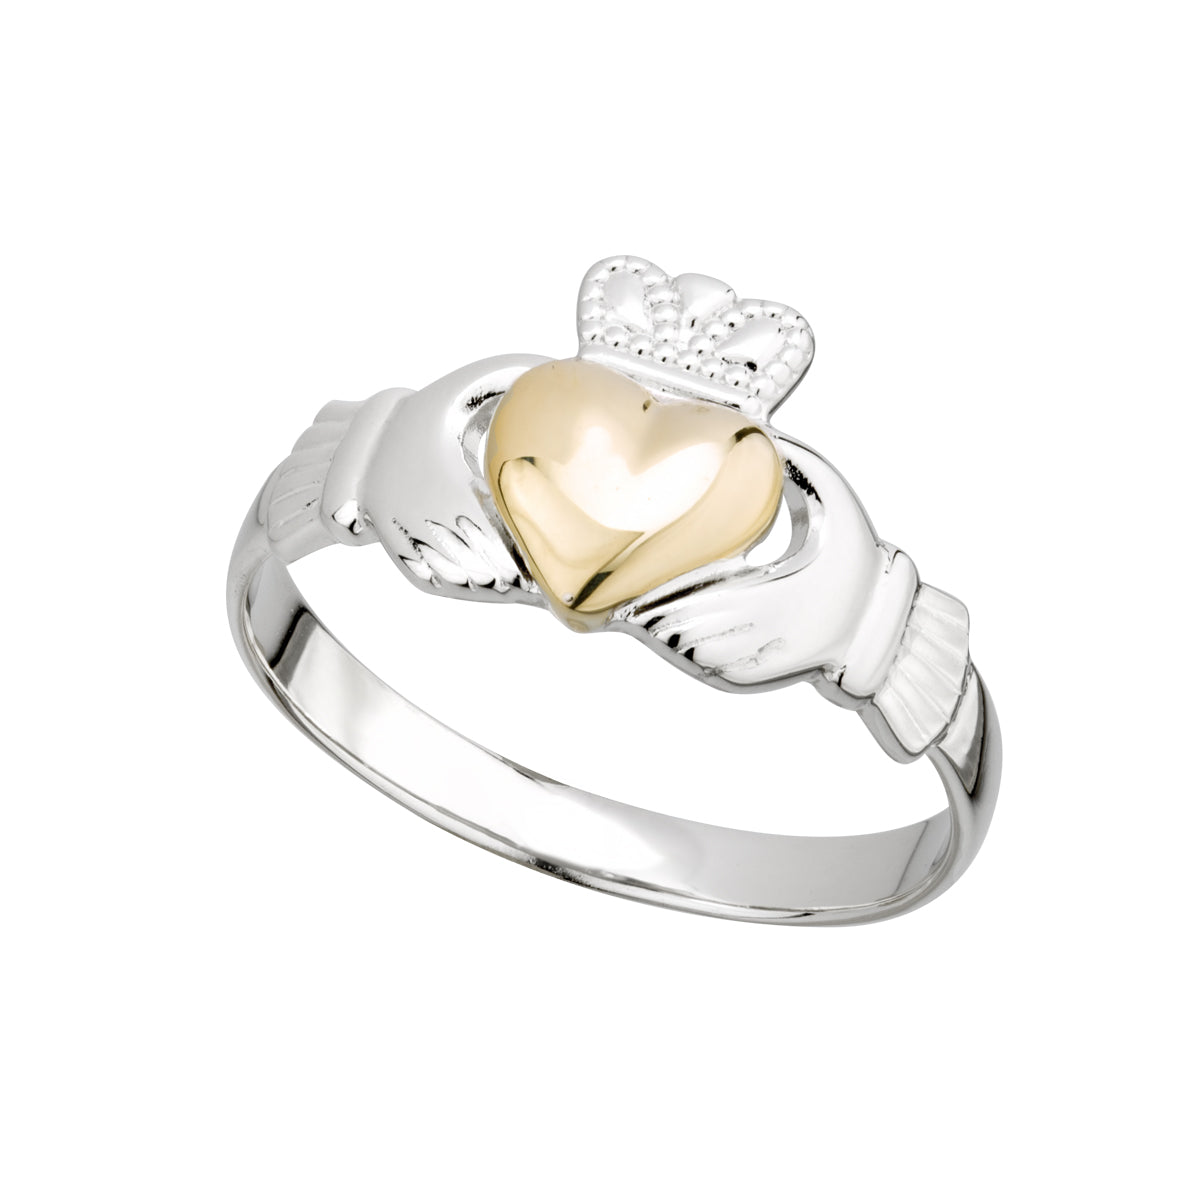 ladies sterling silver gold heart claddagh ring s21046 from Solvar